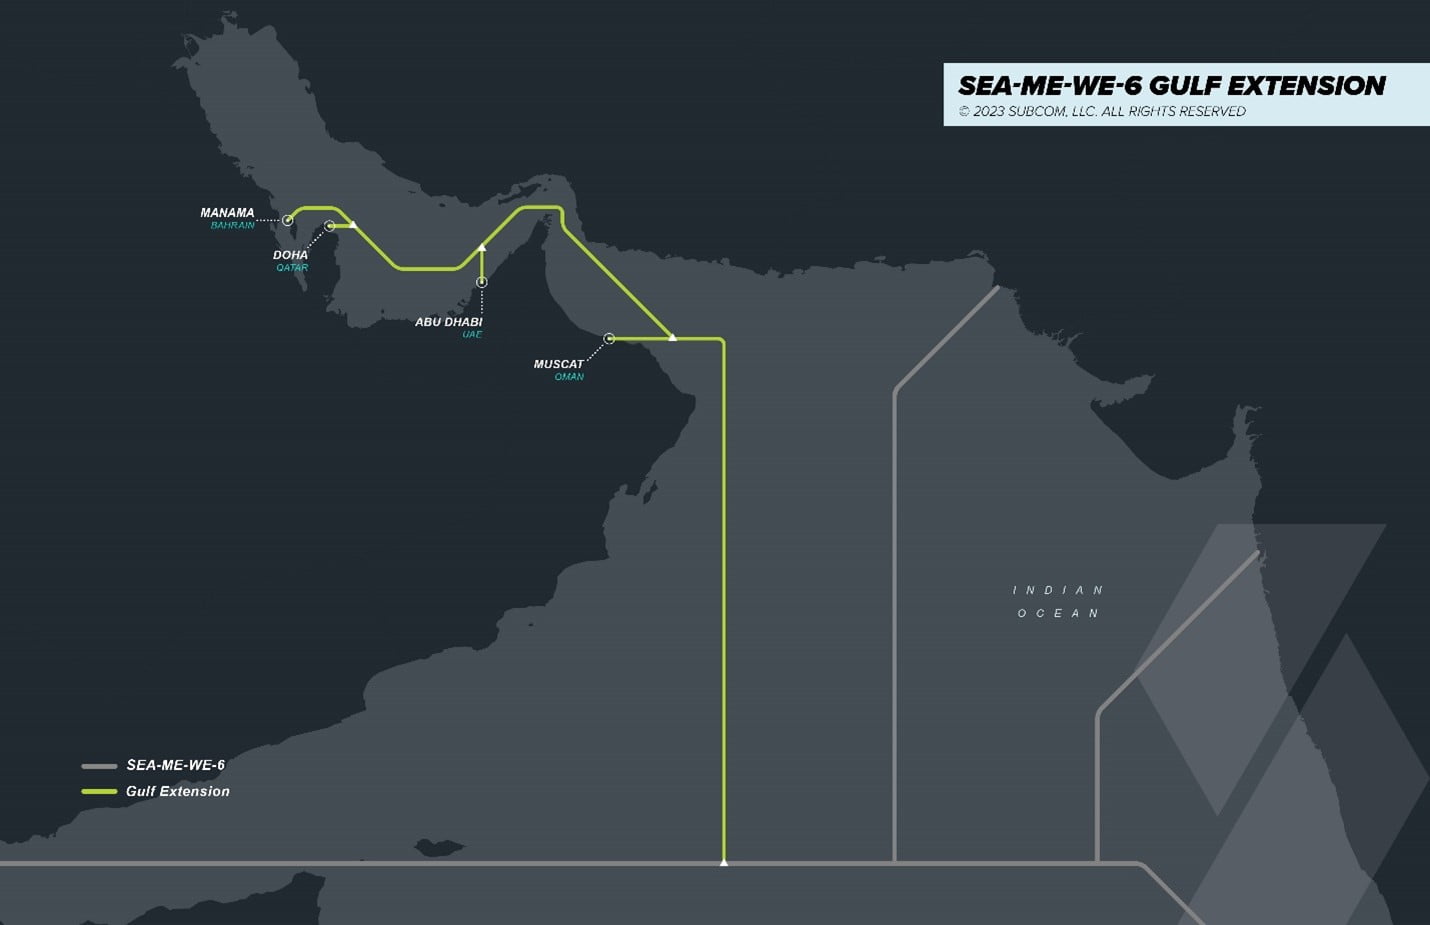 Batelco and SubCom partner to build Al Khaleej Cable, enhancing Bahrain's data capabilities. Completion expected by Q2 2026.